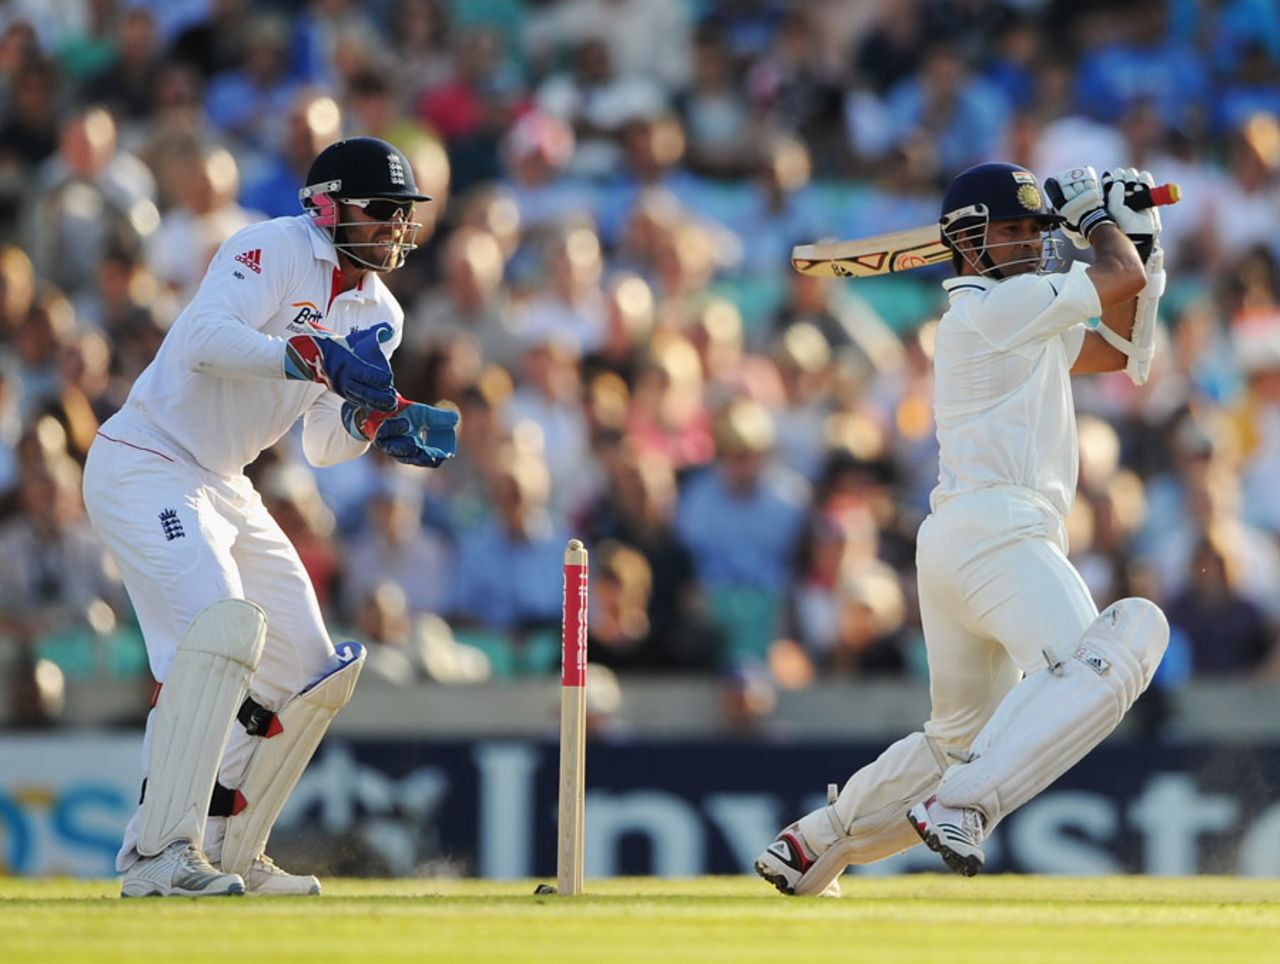 Sachin Tendulkar steers one through the off side, England v India, 4th Test, The Oval, 4th day, August 21, 2011